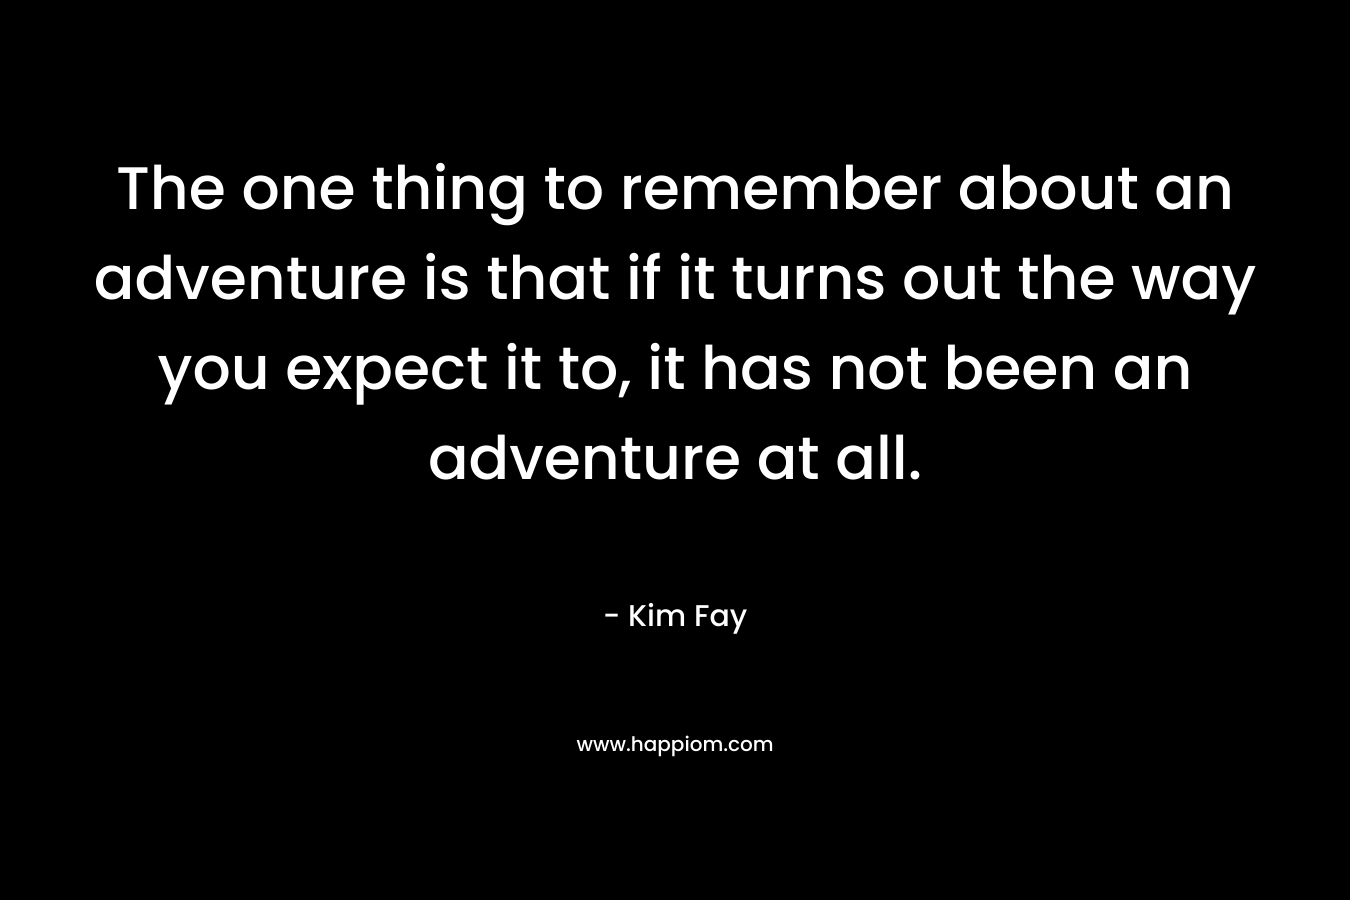 The one thing to remember about an adventure is that if it turns out the way you expect it to, it has not been an adventure at all.